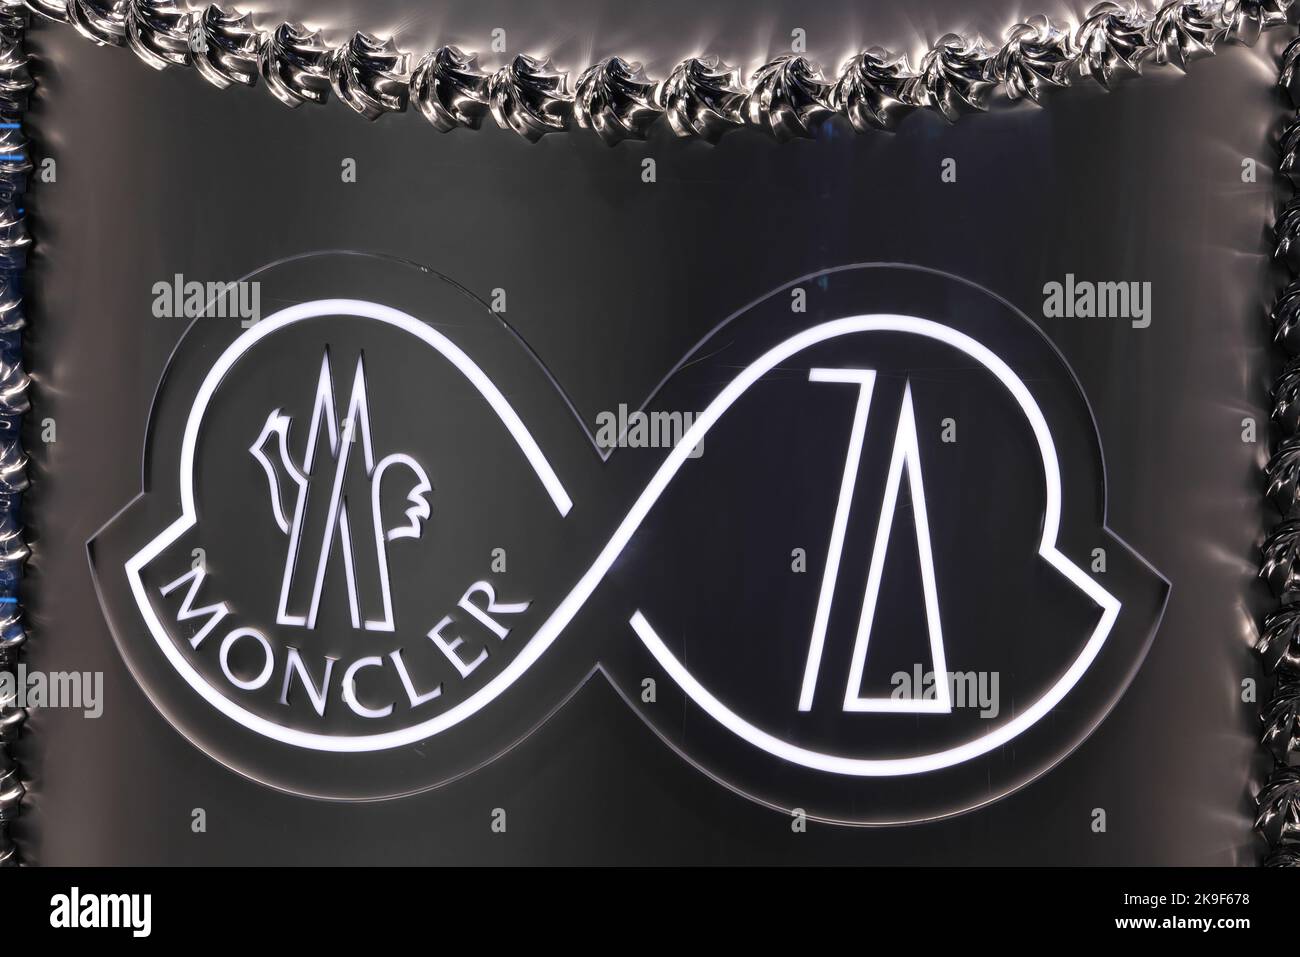 Moncler fashion hi-res stock photography and images - Alamy